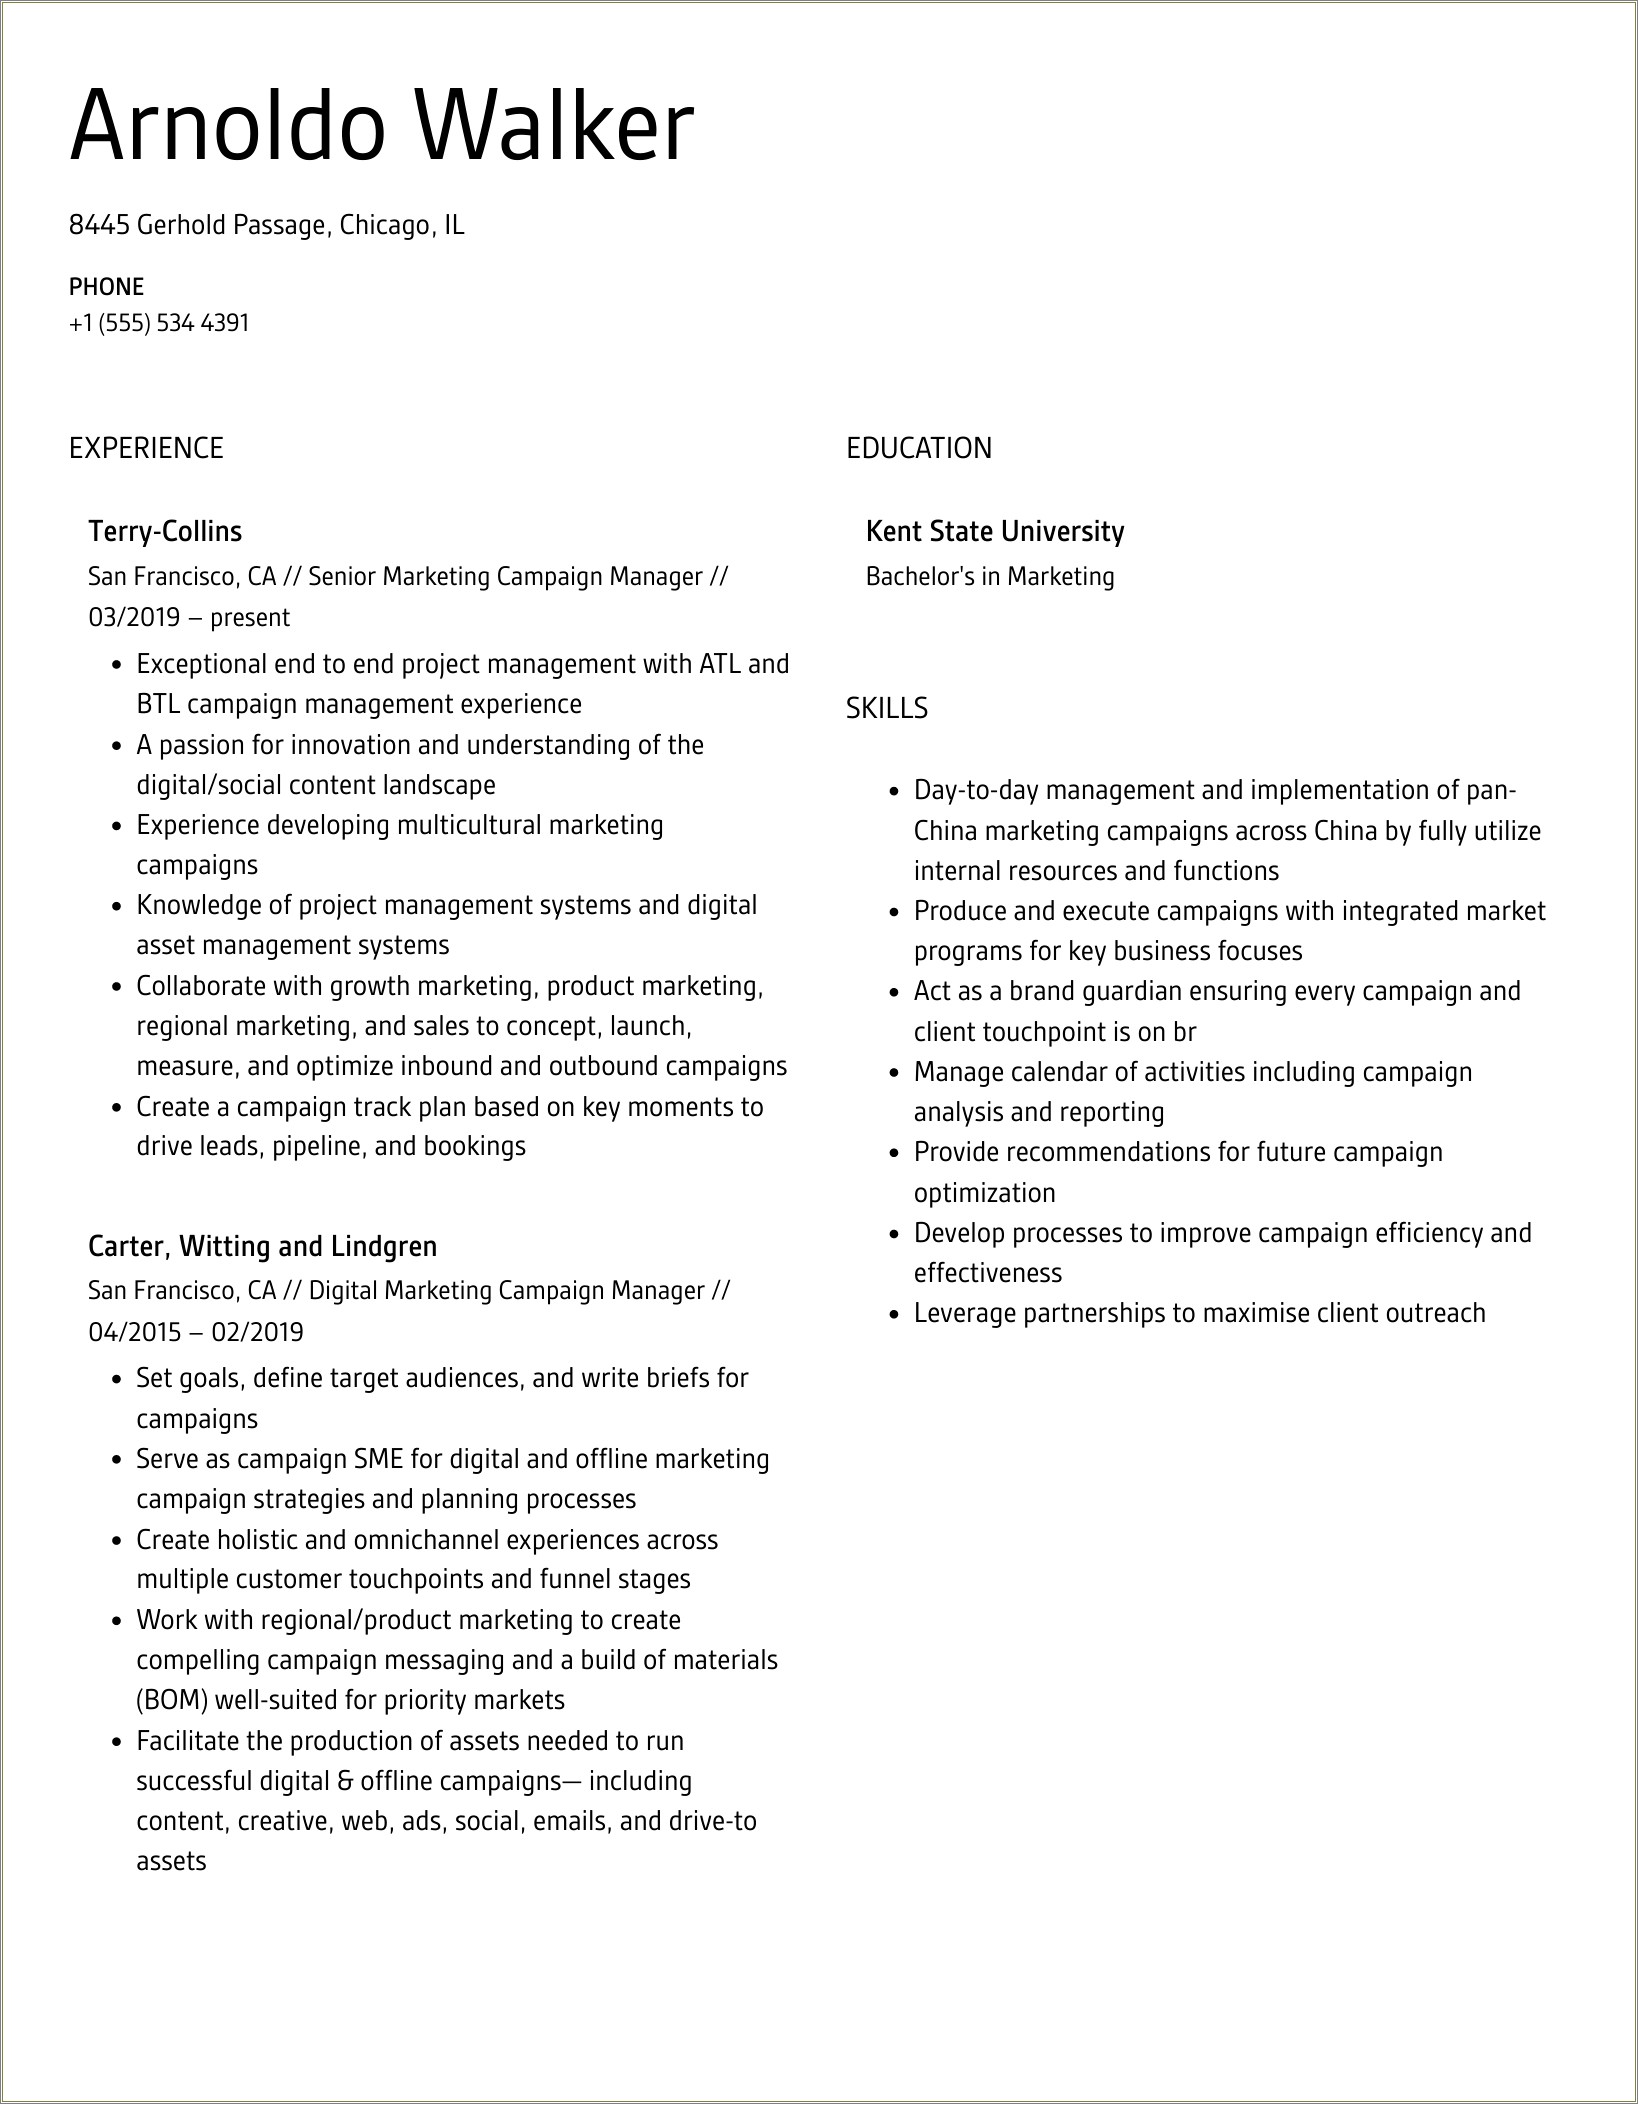 White House Resume For Campaign Managments Skills